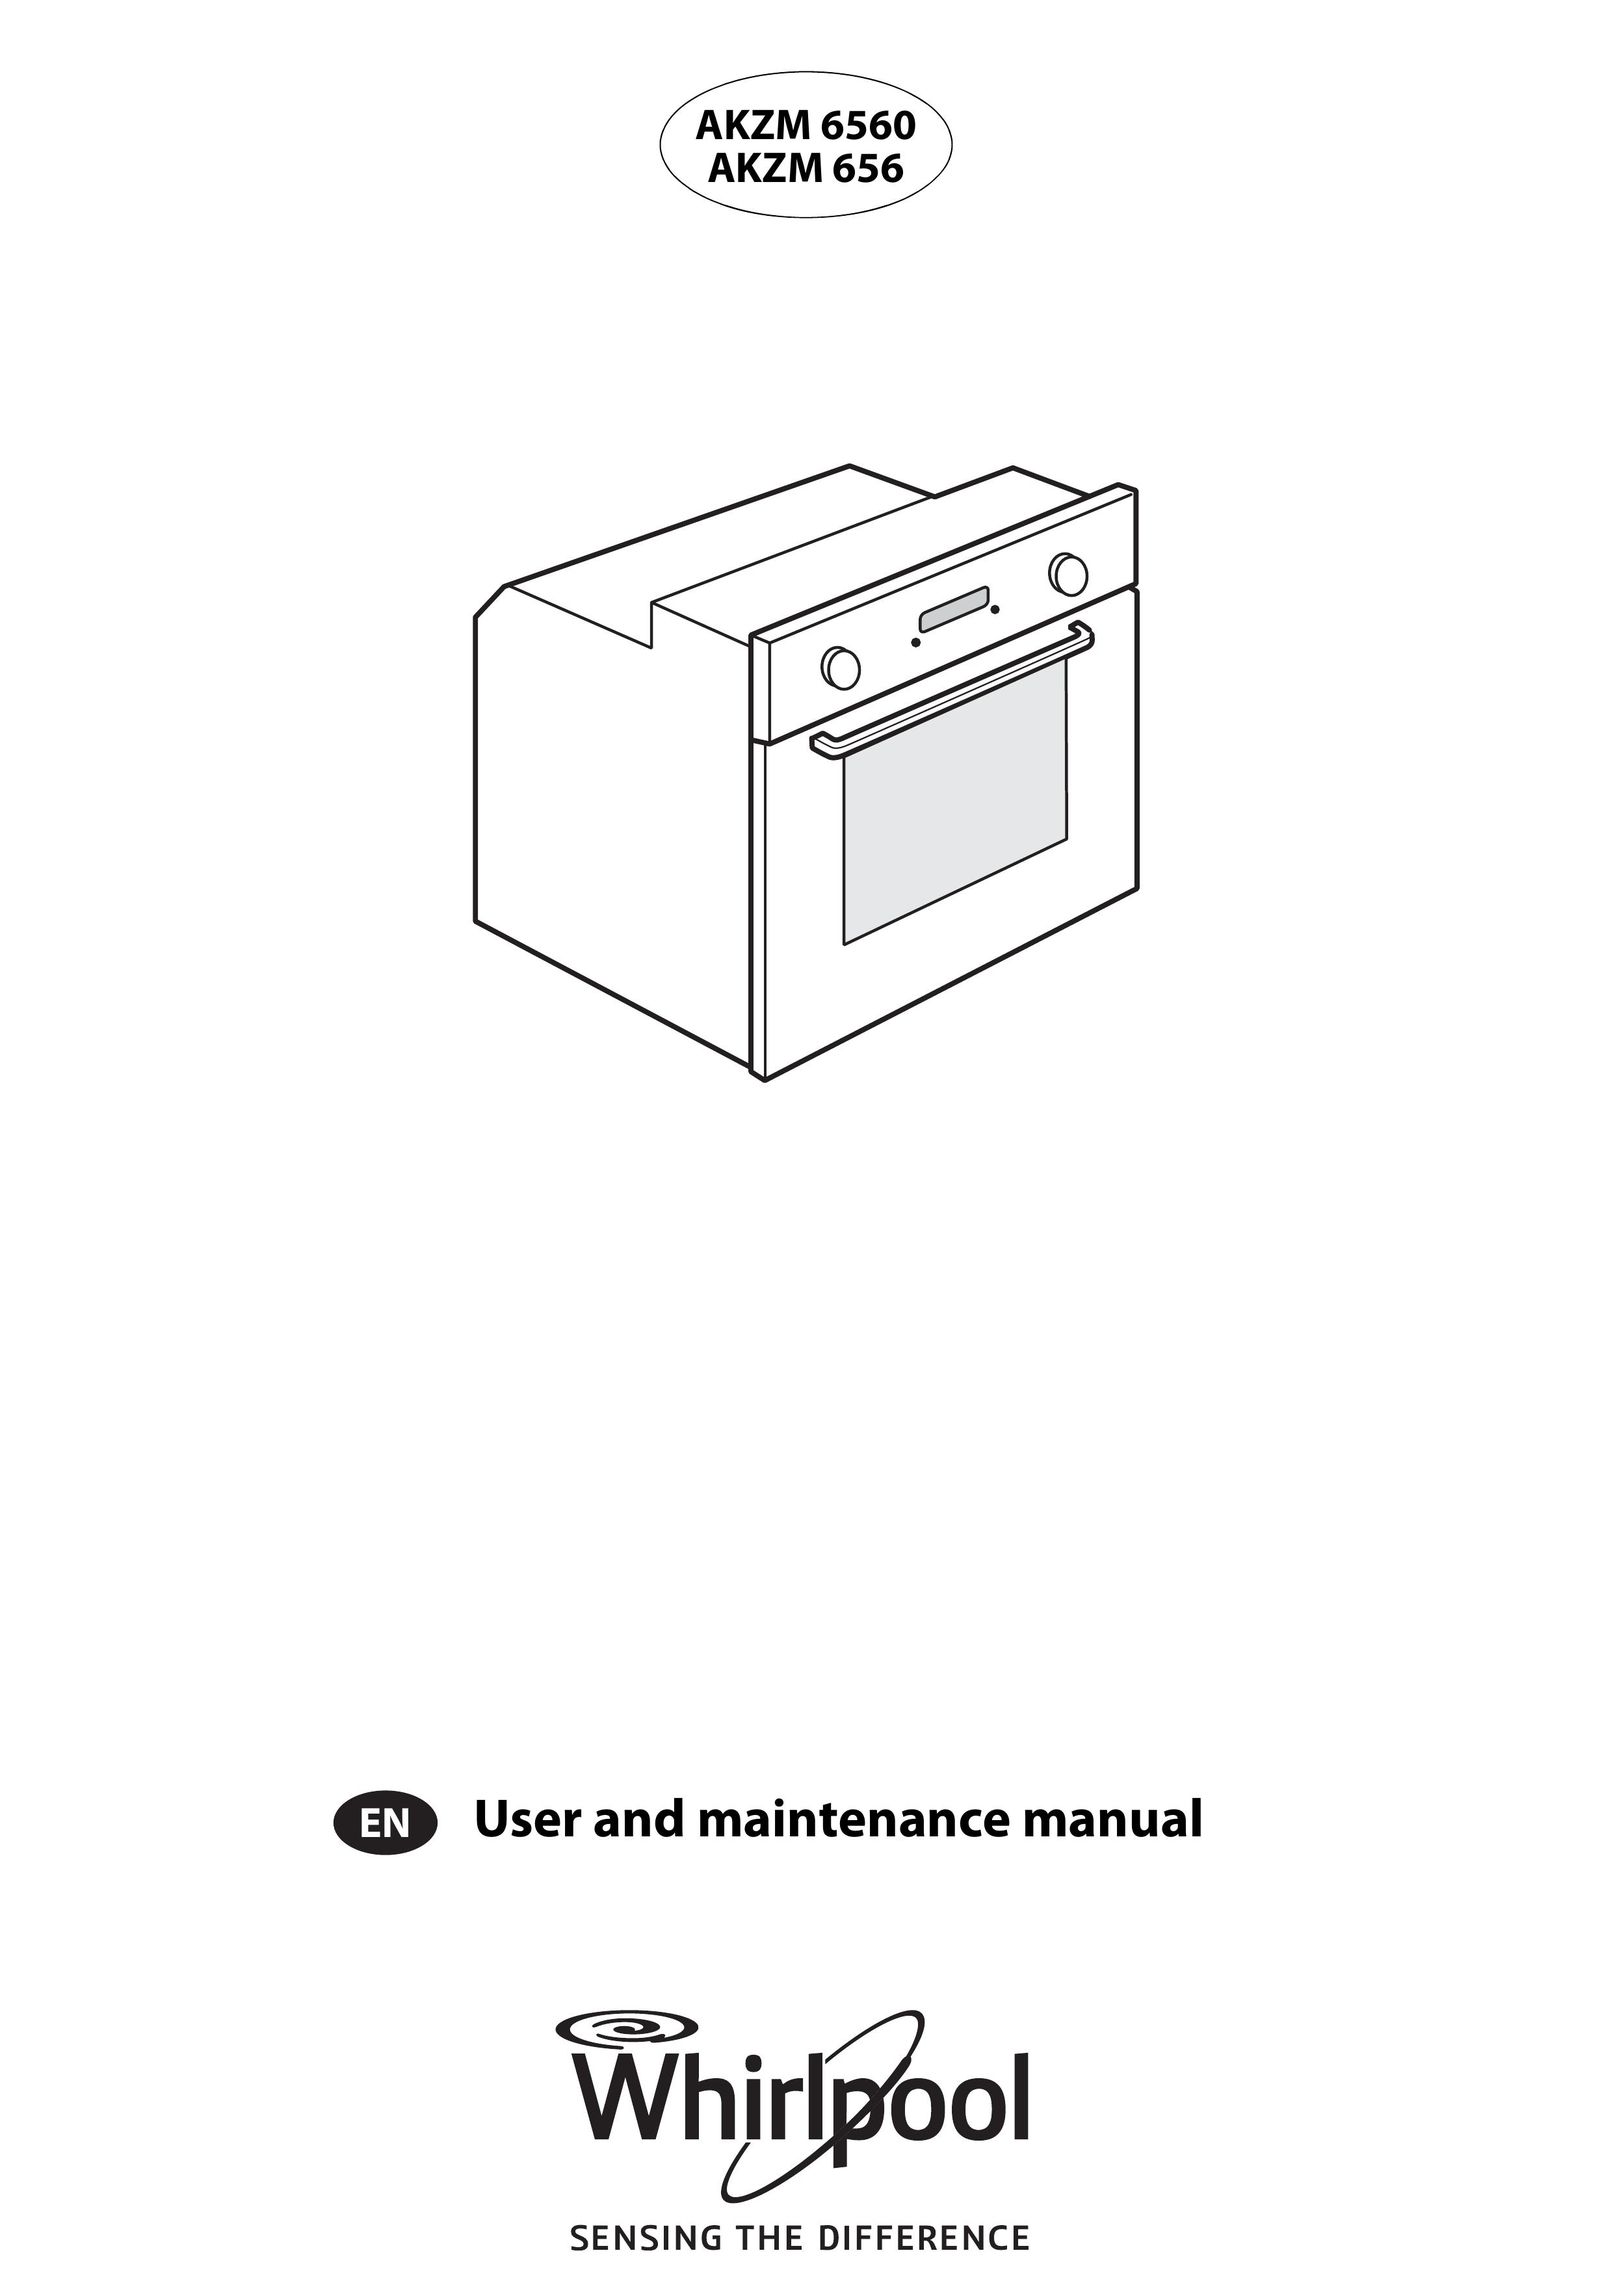 Whirlpool AKZM 6560 Oven User Manual